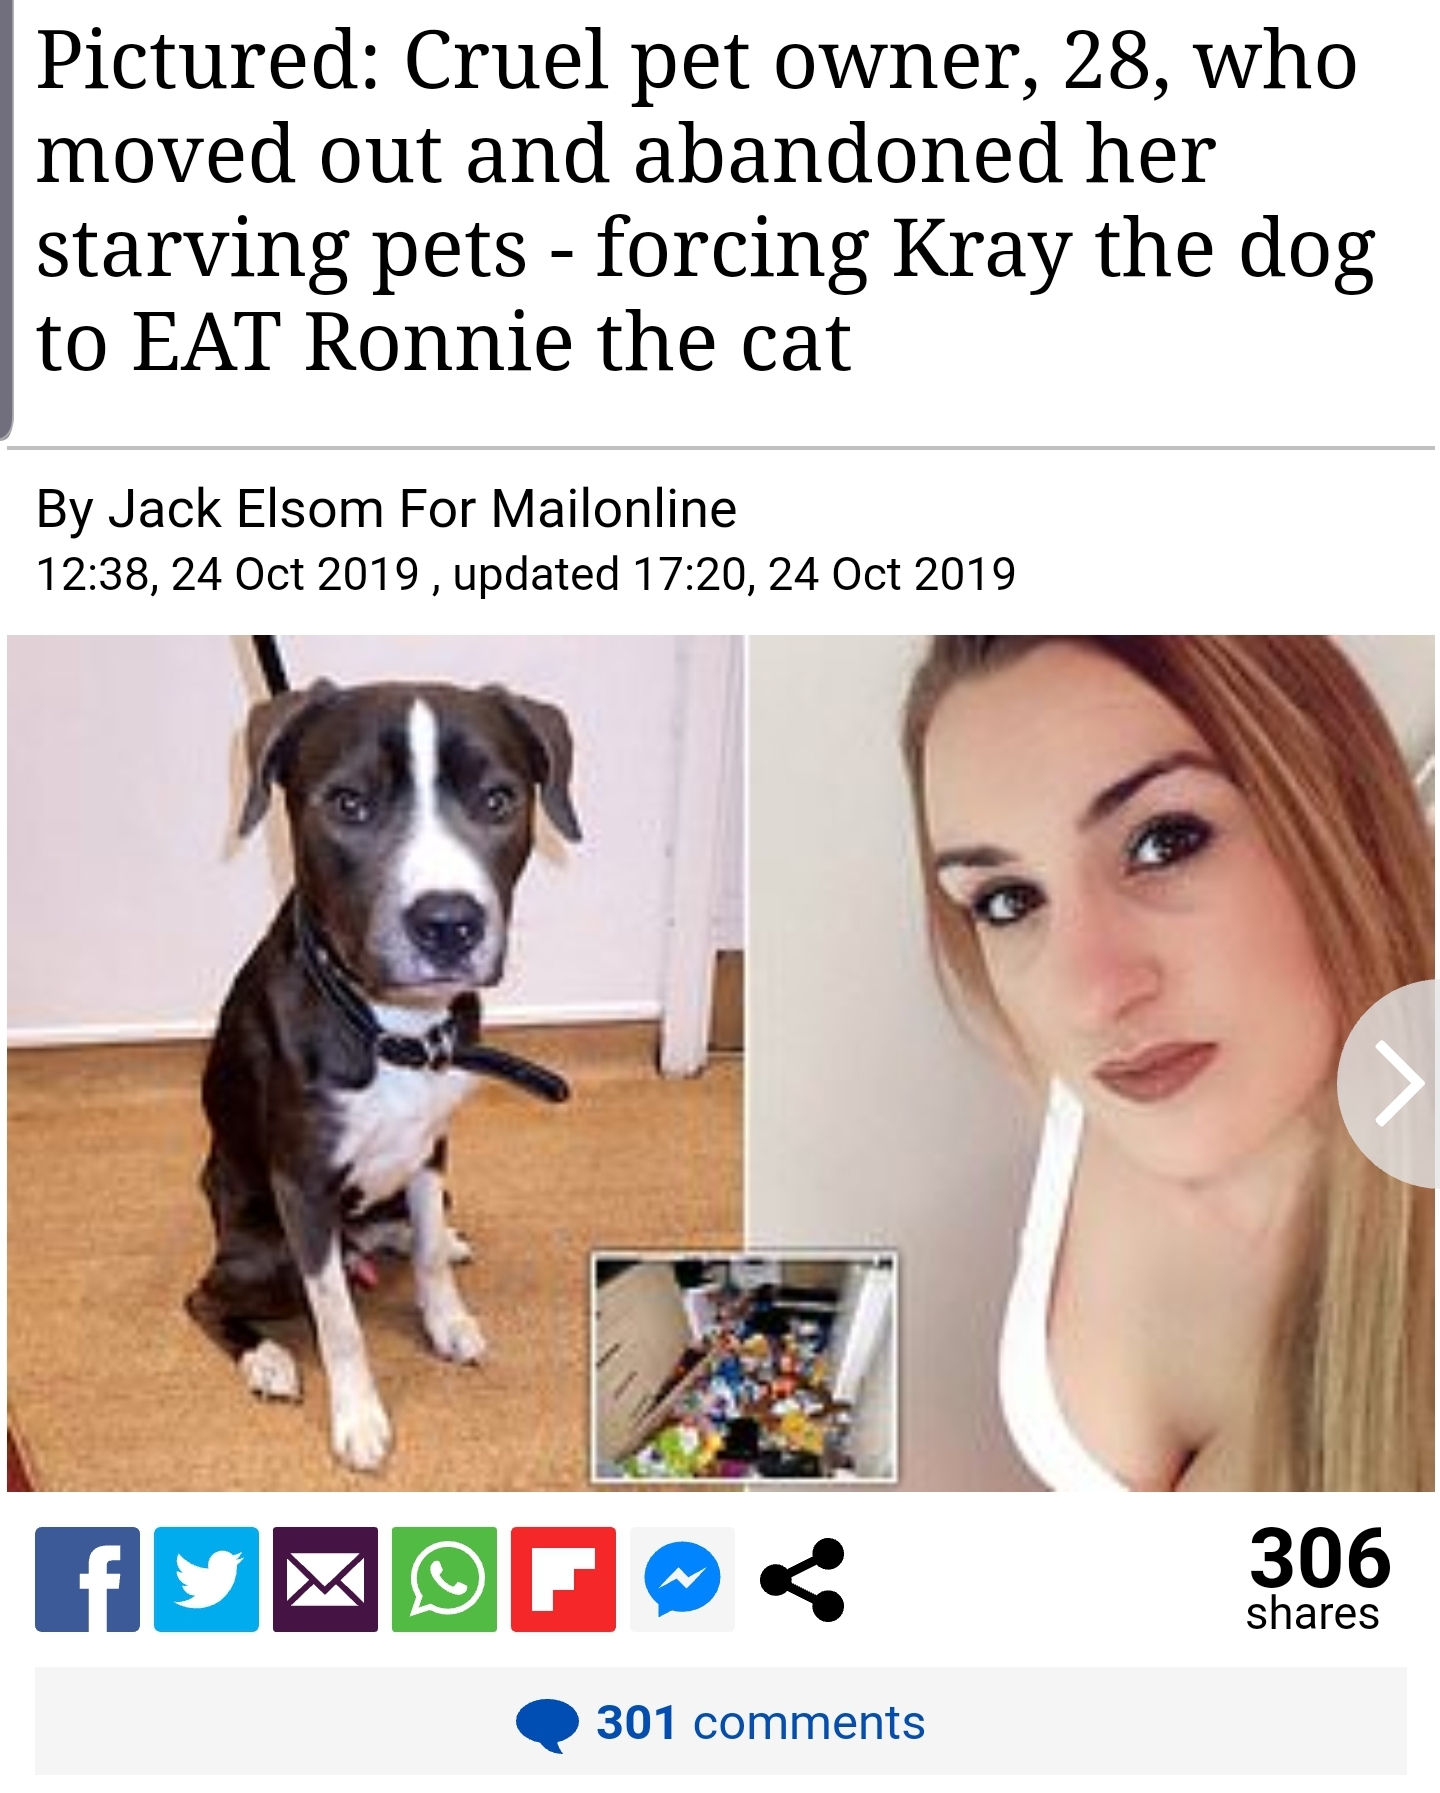 cameron mitchell the glee project - Pictured Cruel pet owner, 28, who moved out and abandoned her starving pets forcing Kray the dog to Eat Ronnie the cat By Jack Elsom For Mailonline , , updated , 306 301